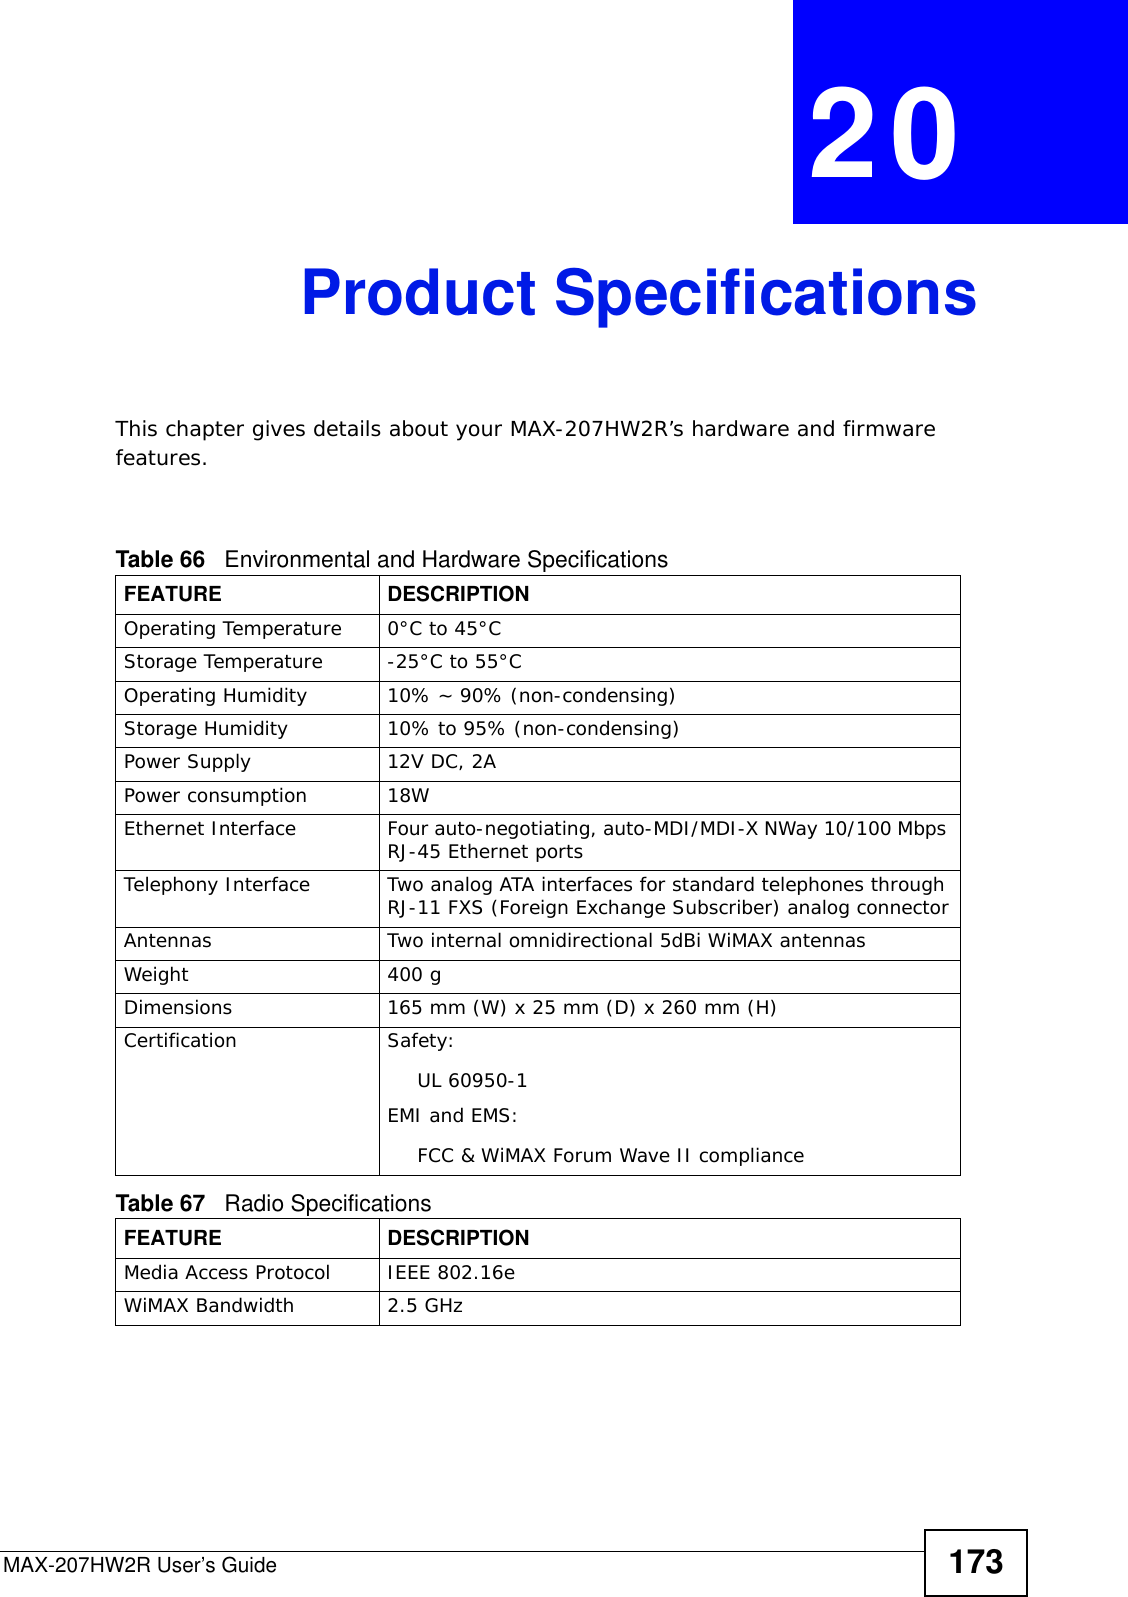 MAX-207HW2R User’s Guide 173CHAPTER  20 Product SpecificationsThis chapter gives details about your MAX-207HW2R’s hardware and firmware features.                     Table 66   Environmental and Hardware SpecificationsFEATURE DESCRIPTIONOperating Temperature 0°C to 45°CStorage Temperature -25°C to 55°COperating Humidity 10% ~ 90% (non-condensing)Storage Humidity  10% to 95% (non-condensing)Power Supply 12V DC, 2APower consumption 18WEthernet Interface Four auto-negotiating, auto-MDI/MDI-X NWay 10/100 Mbps RJ-45 Ethernet portsTelephony Interface Two analog ATA interfaces for standard telephones through RJ-11 FXS (Foreign Exchange Subscriber) analog connectorAntennas Two internal omnidirectional 5dBi WiMAX antennasWeight 400 gDimensions 165 mm (W) x 25 mm (D) x 260 mm (H)Certification Safety: UL 60950-1EMI and EMS: FCC &amp; WiMAX Forum Wave II complianceTable 67   Radio SpecificationsFEATURE DESCRIPTIONMedia Access Protocol IEEE 802.16eWiMAX Bandwidth 2.5 GHz